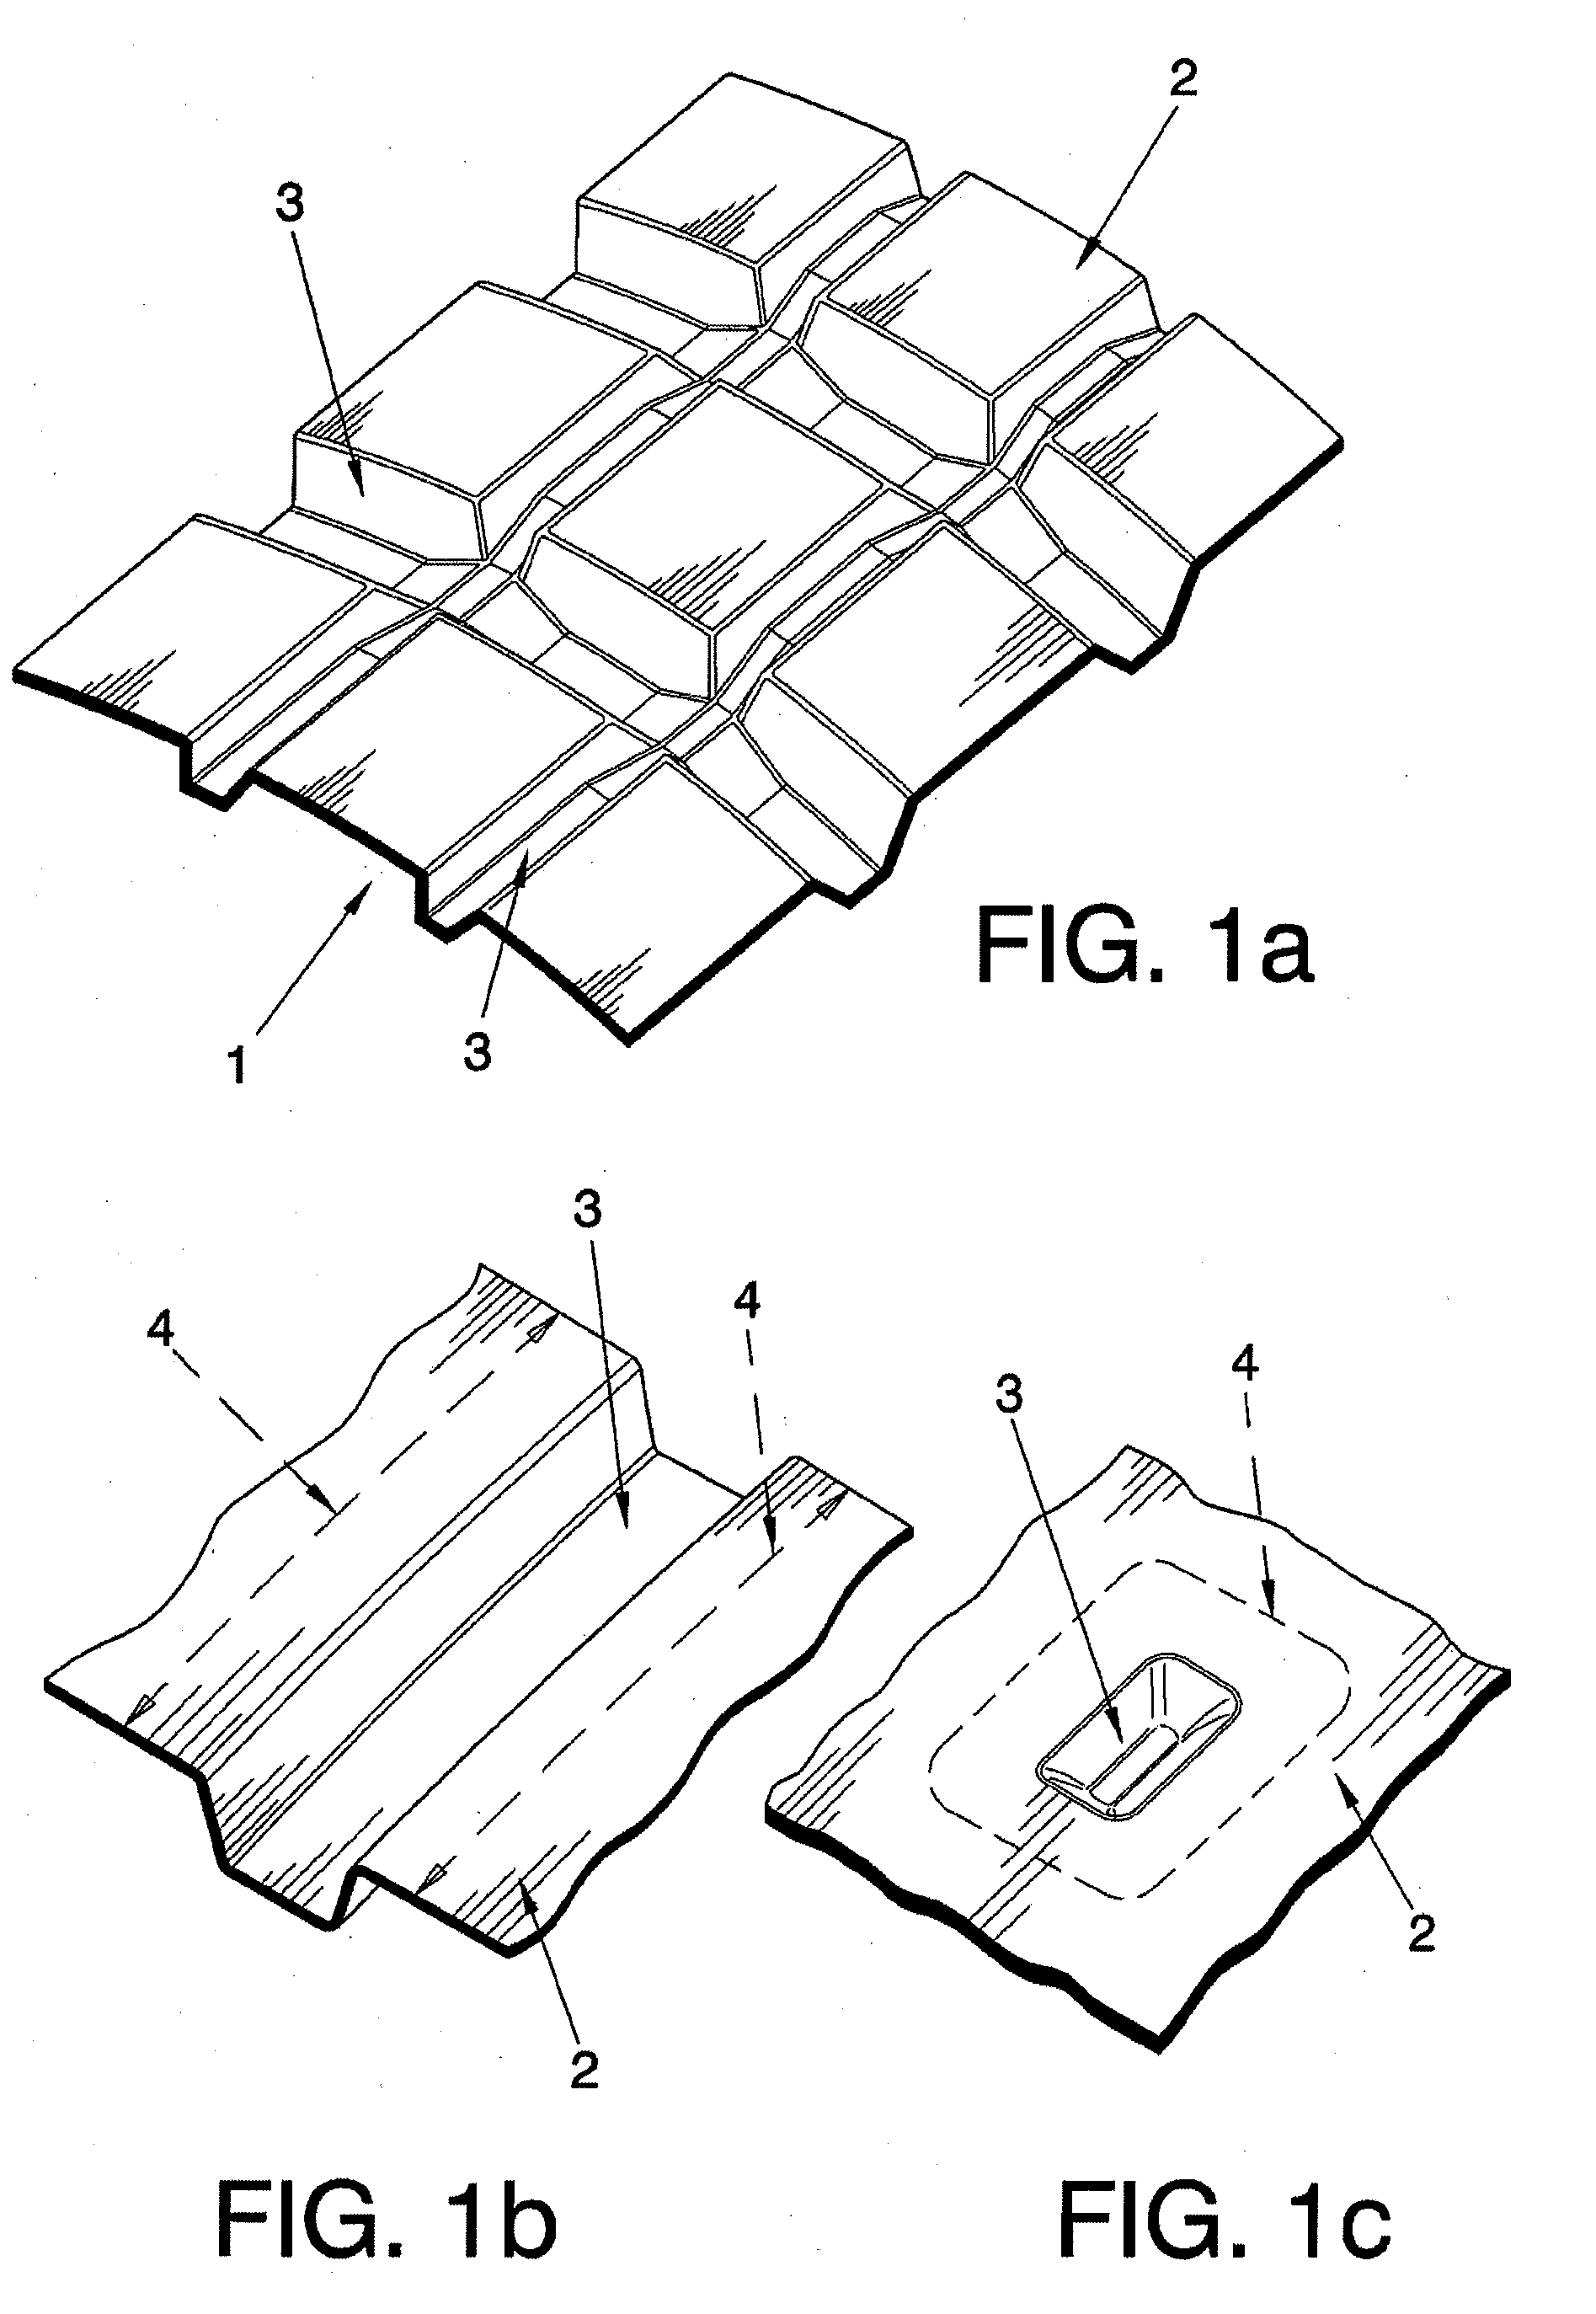 Manufacturing method of a complex geometry panel in prepreg composite material